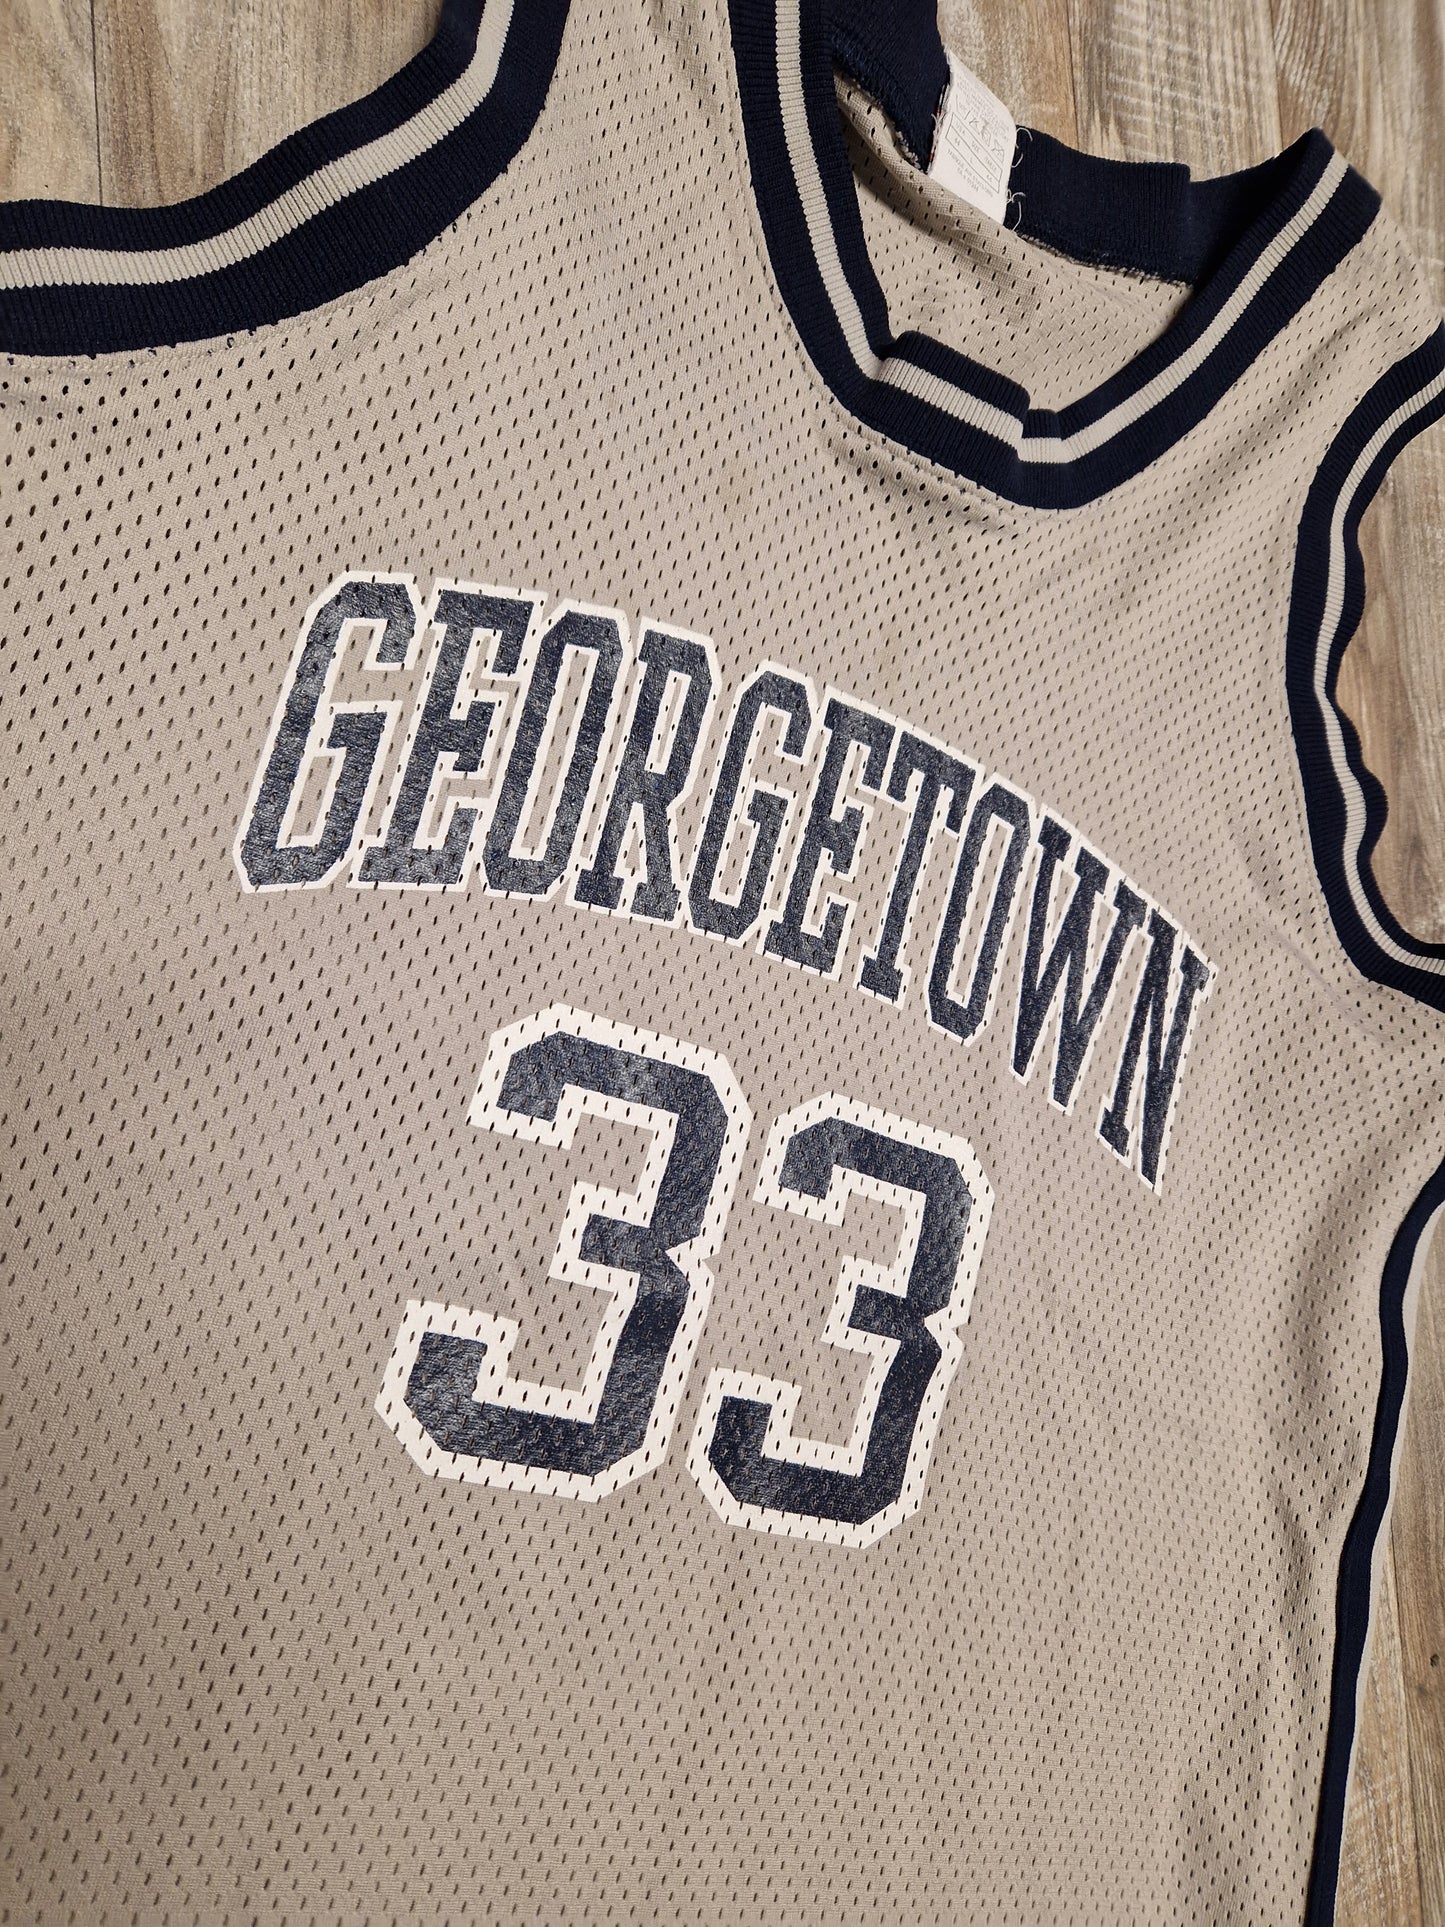 Alonzo Mourning Authentic Georgetown Hoyas Jersey Size Large